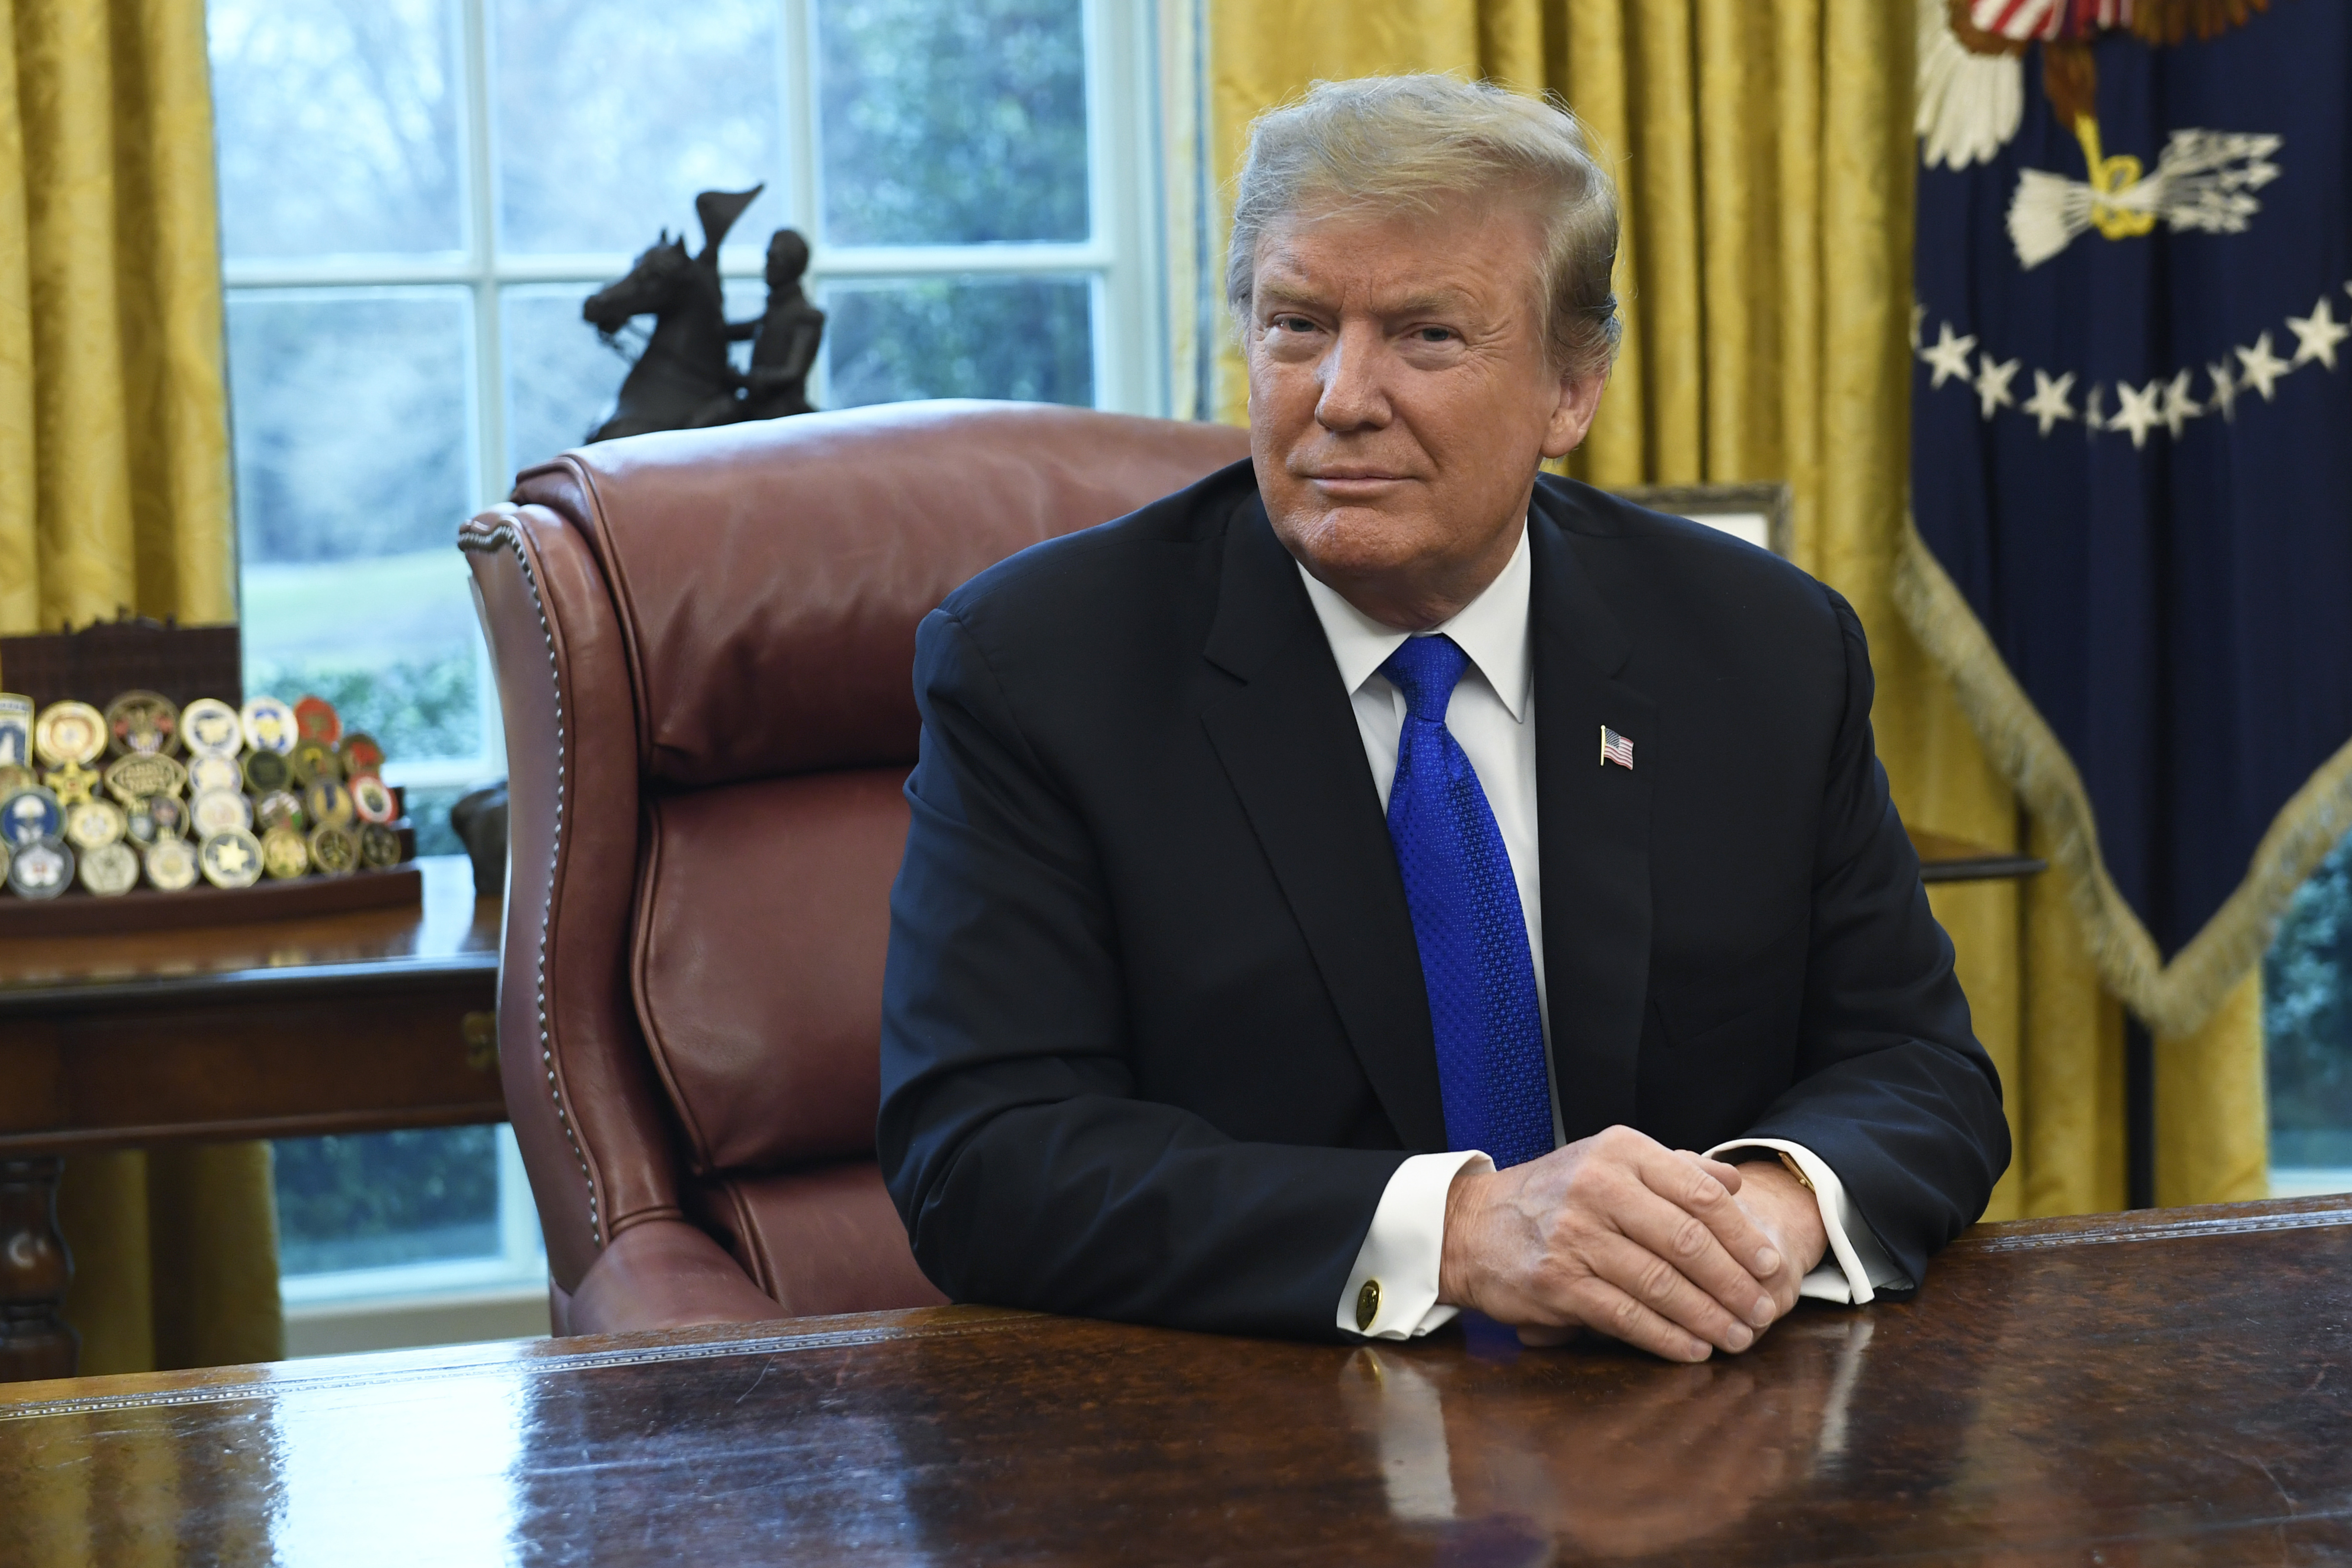 President Donald Trump listens during his meeting with Chinese Vice-Premier Liu He in the Oval Office of the White House in Washington on Friday.